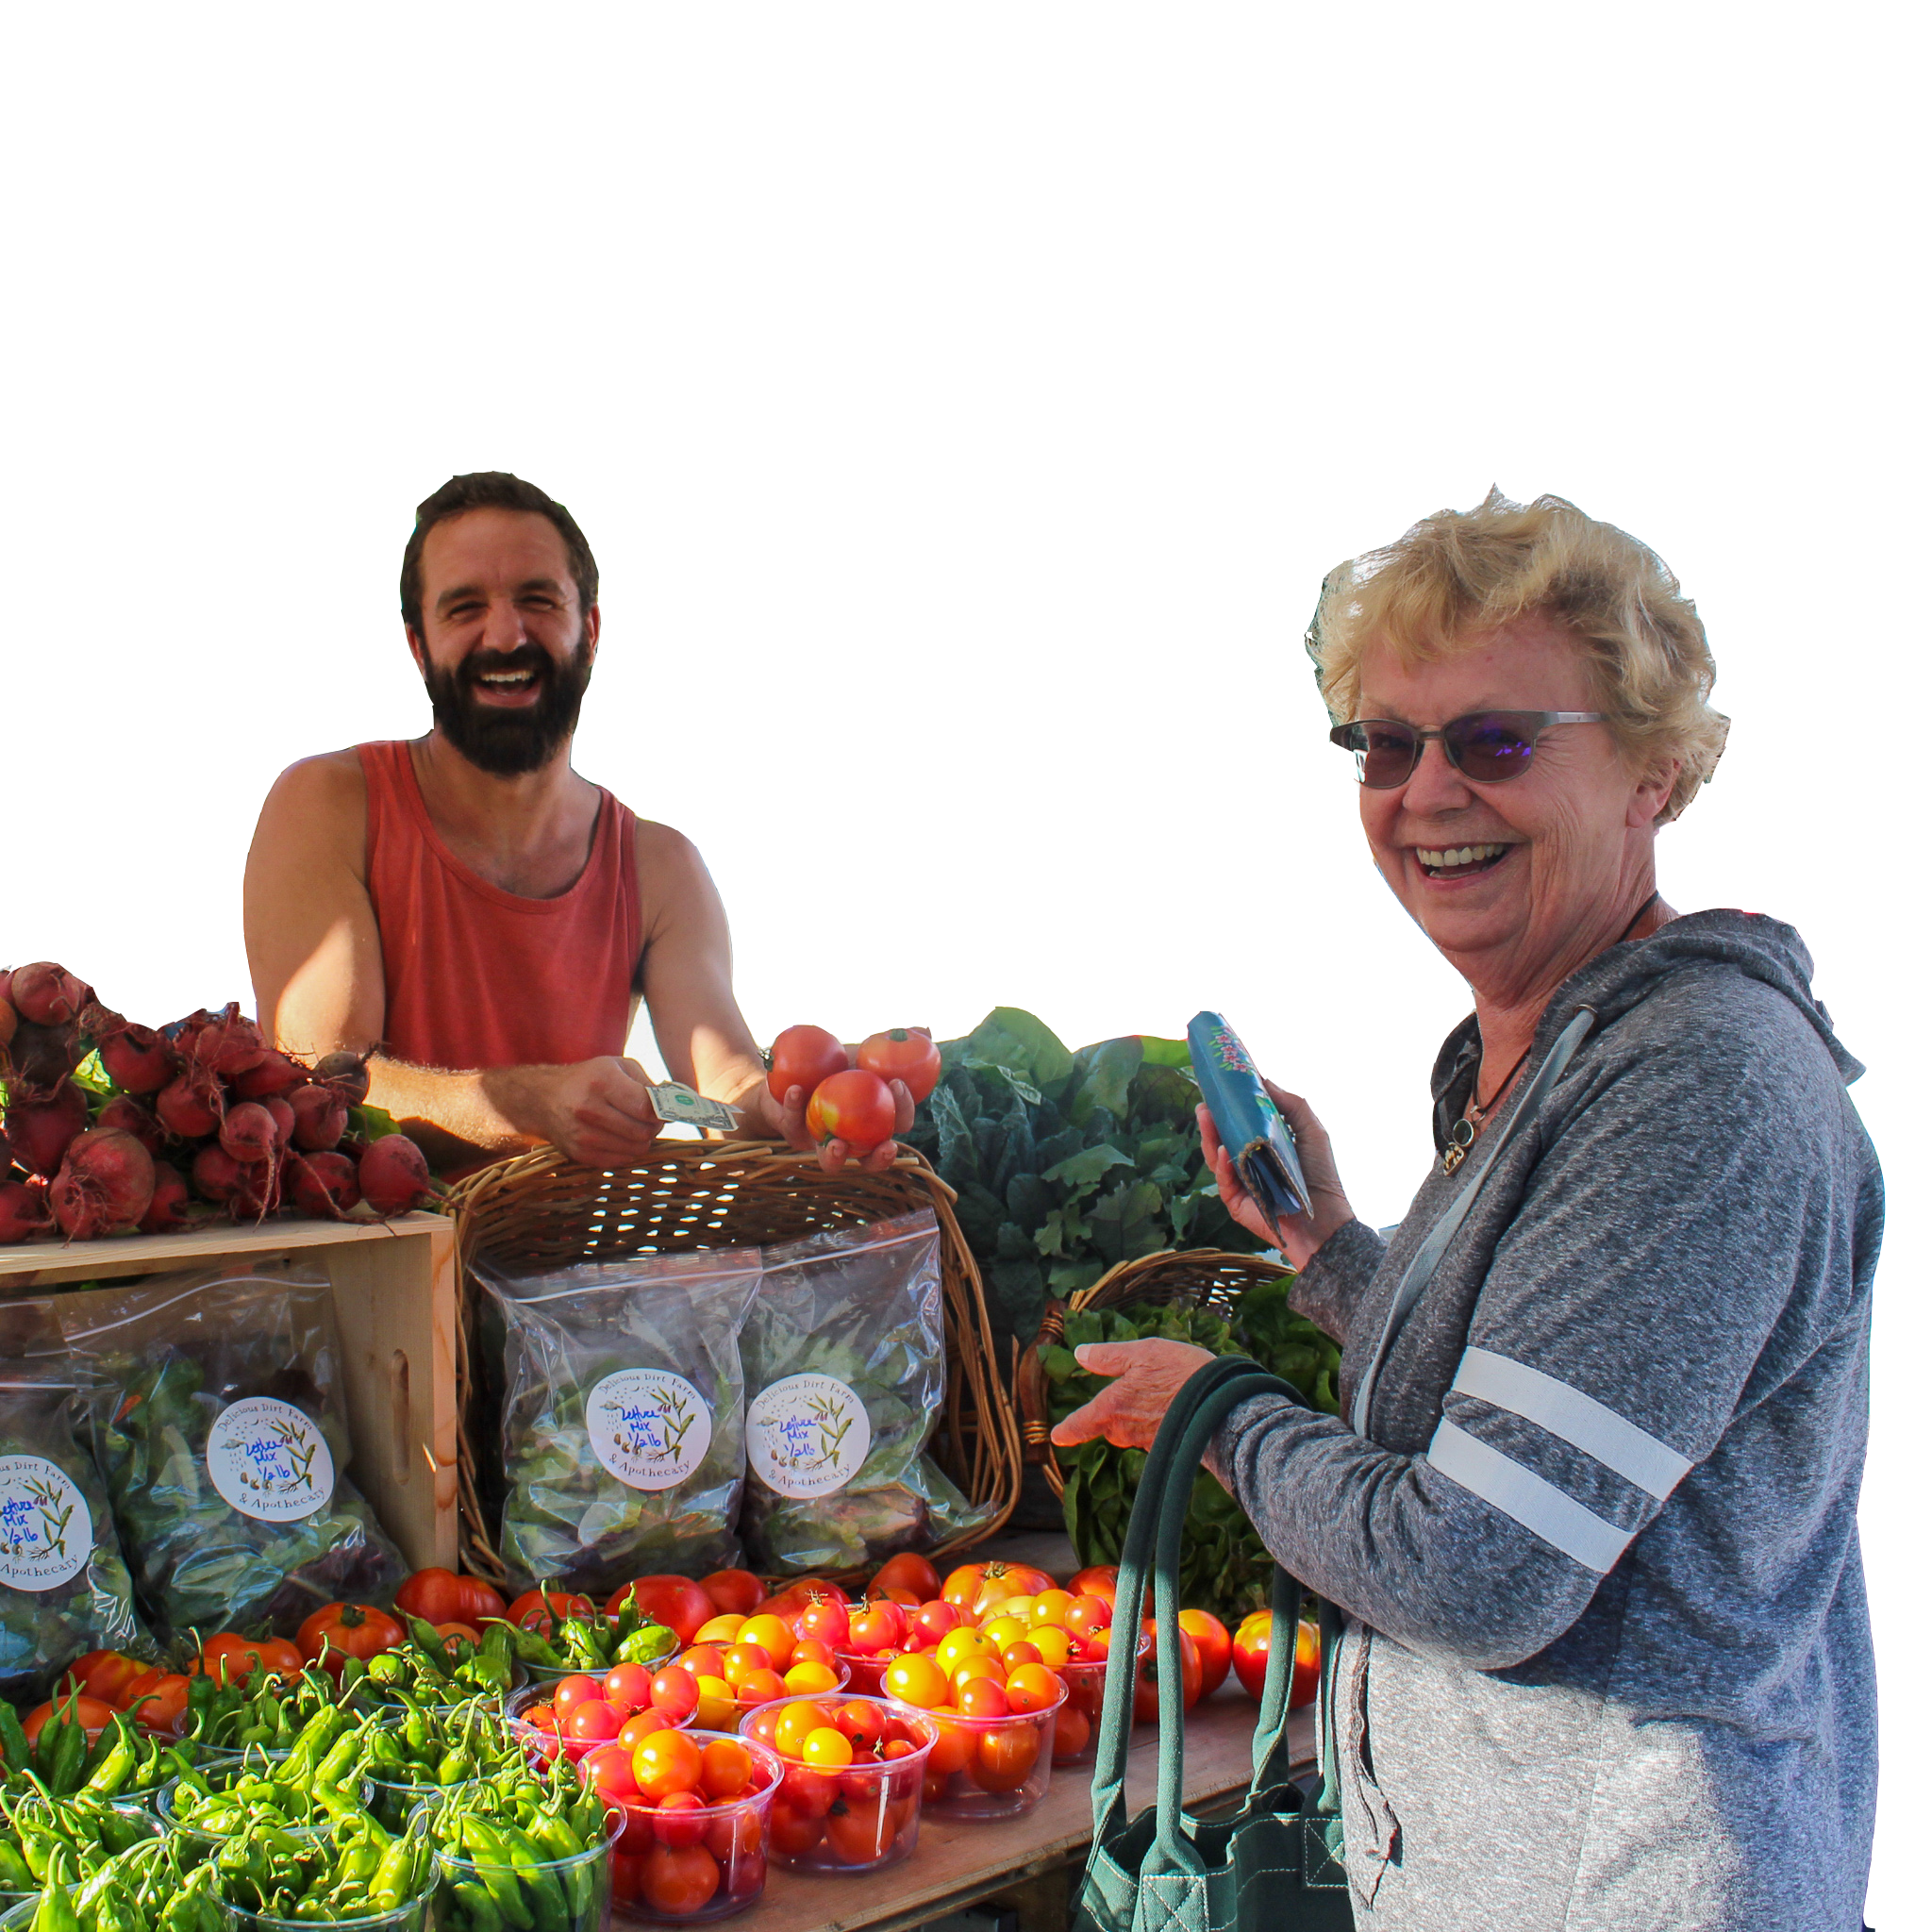 A farmer stands behind a table of produce, smiling at the camera. Another person is standing in front of the table, also smiling and holding a wallet.